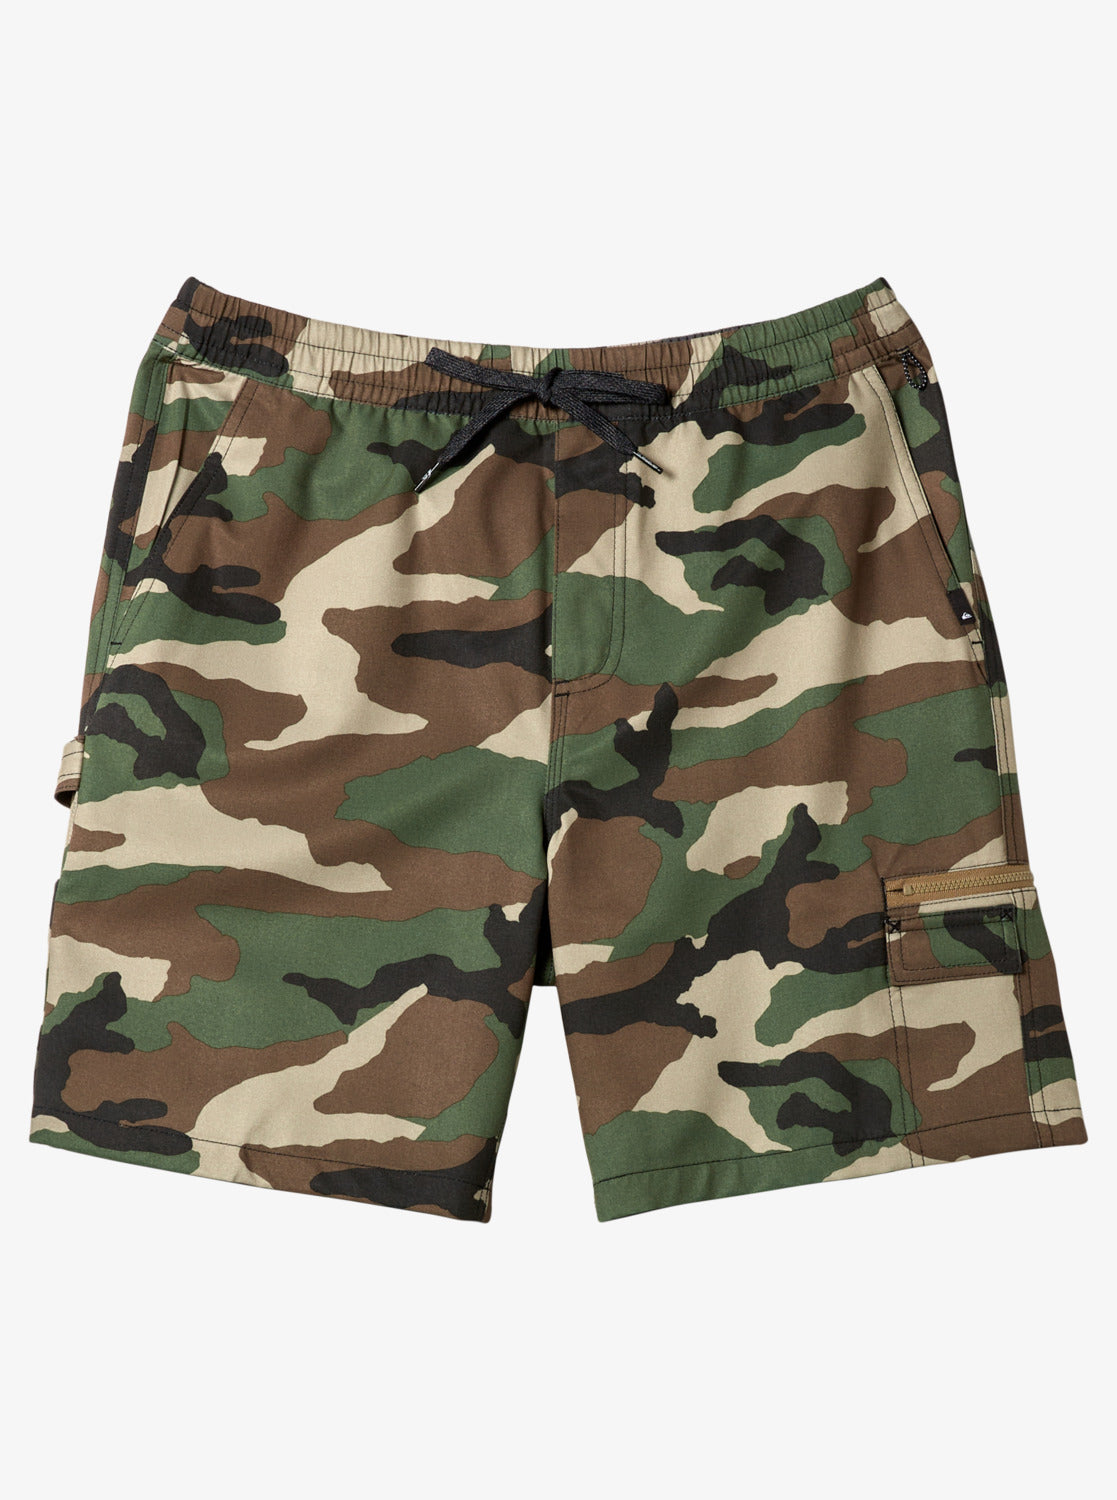 fvwitlyh Gymshark Shorts Men's Camo Cargo Shorts Relaxed Fit Multi